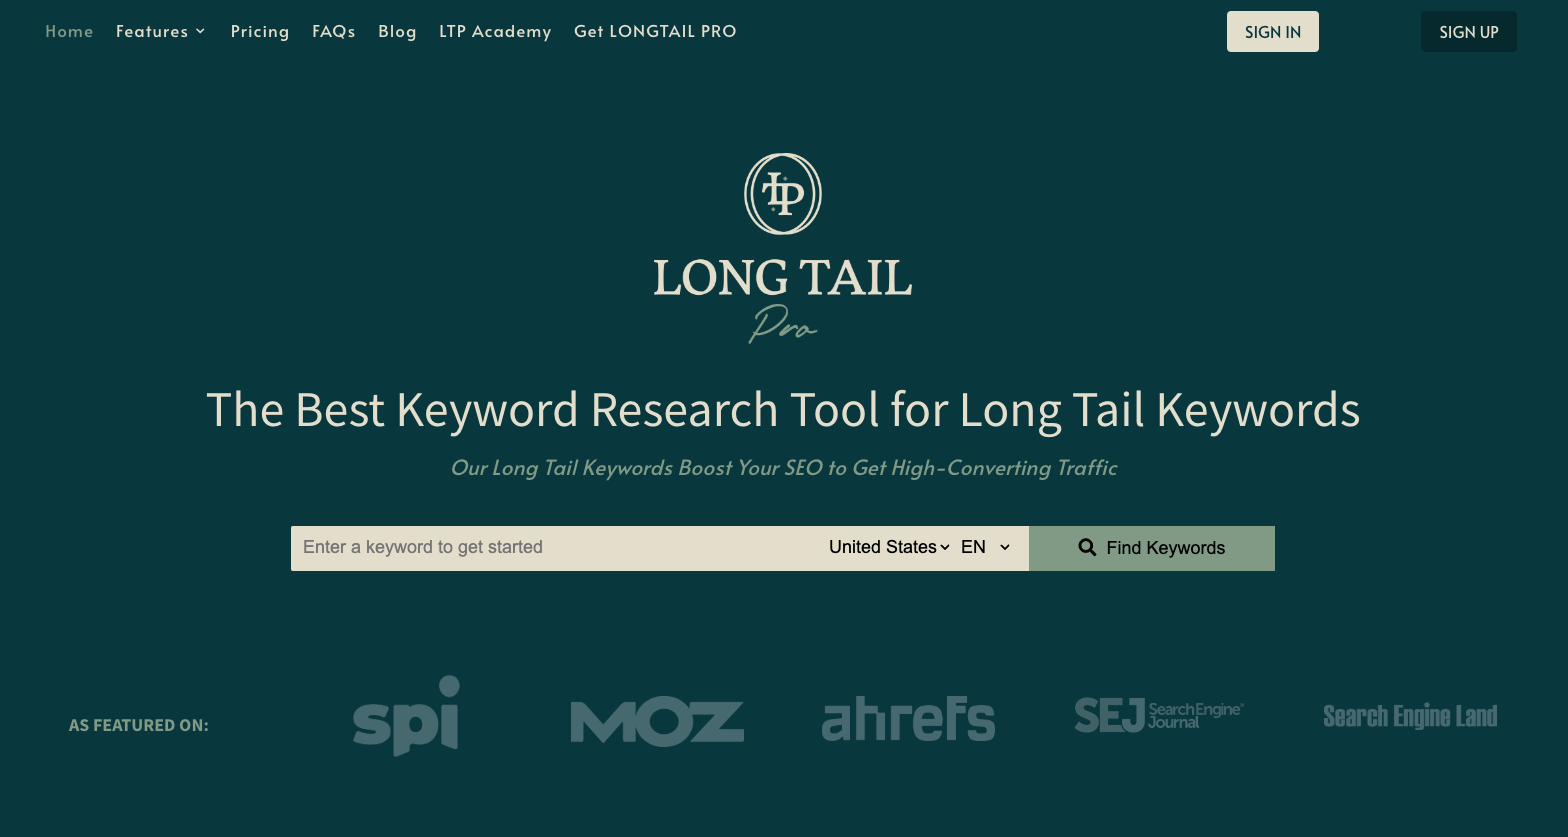 Screenshot Longtail Pro Home Page